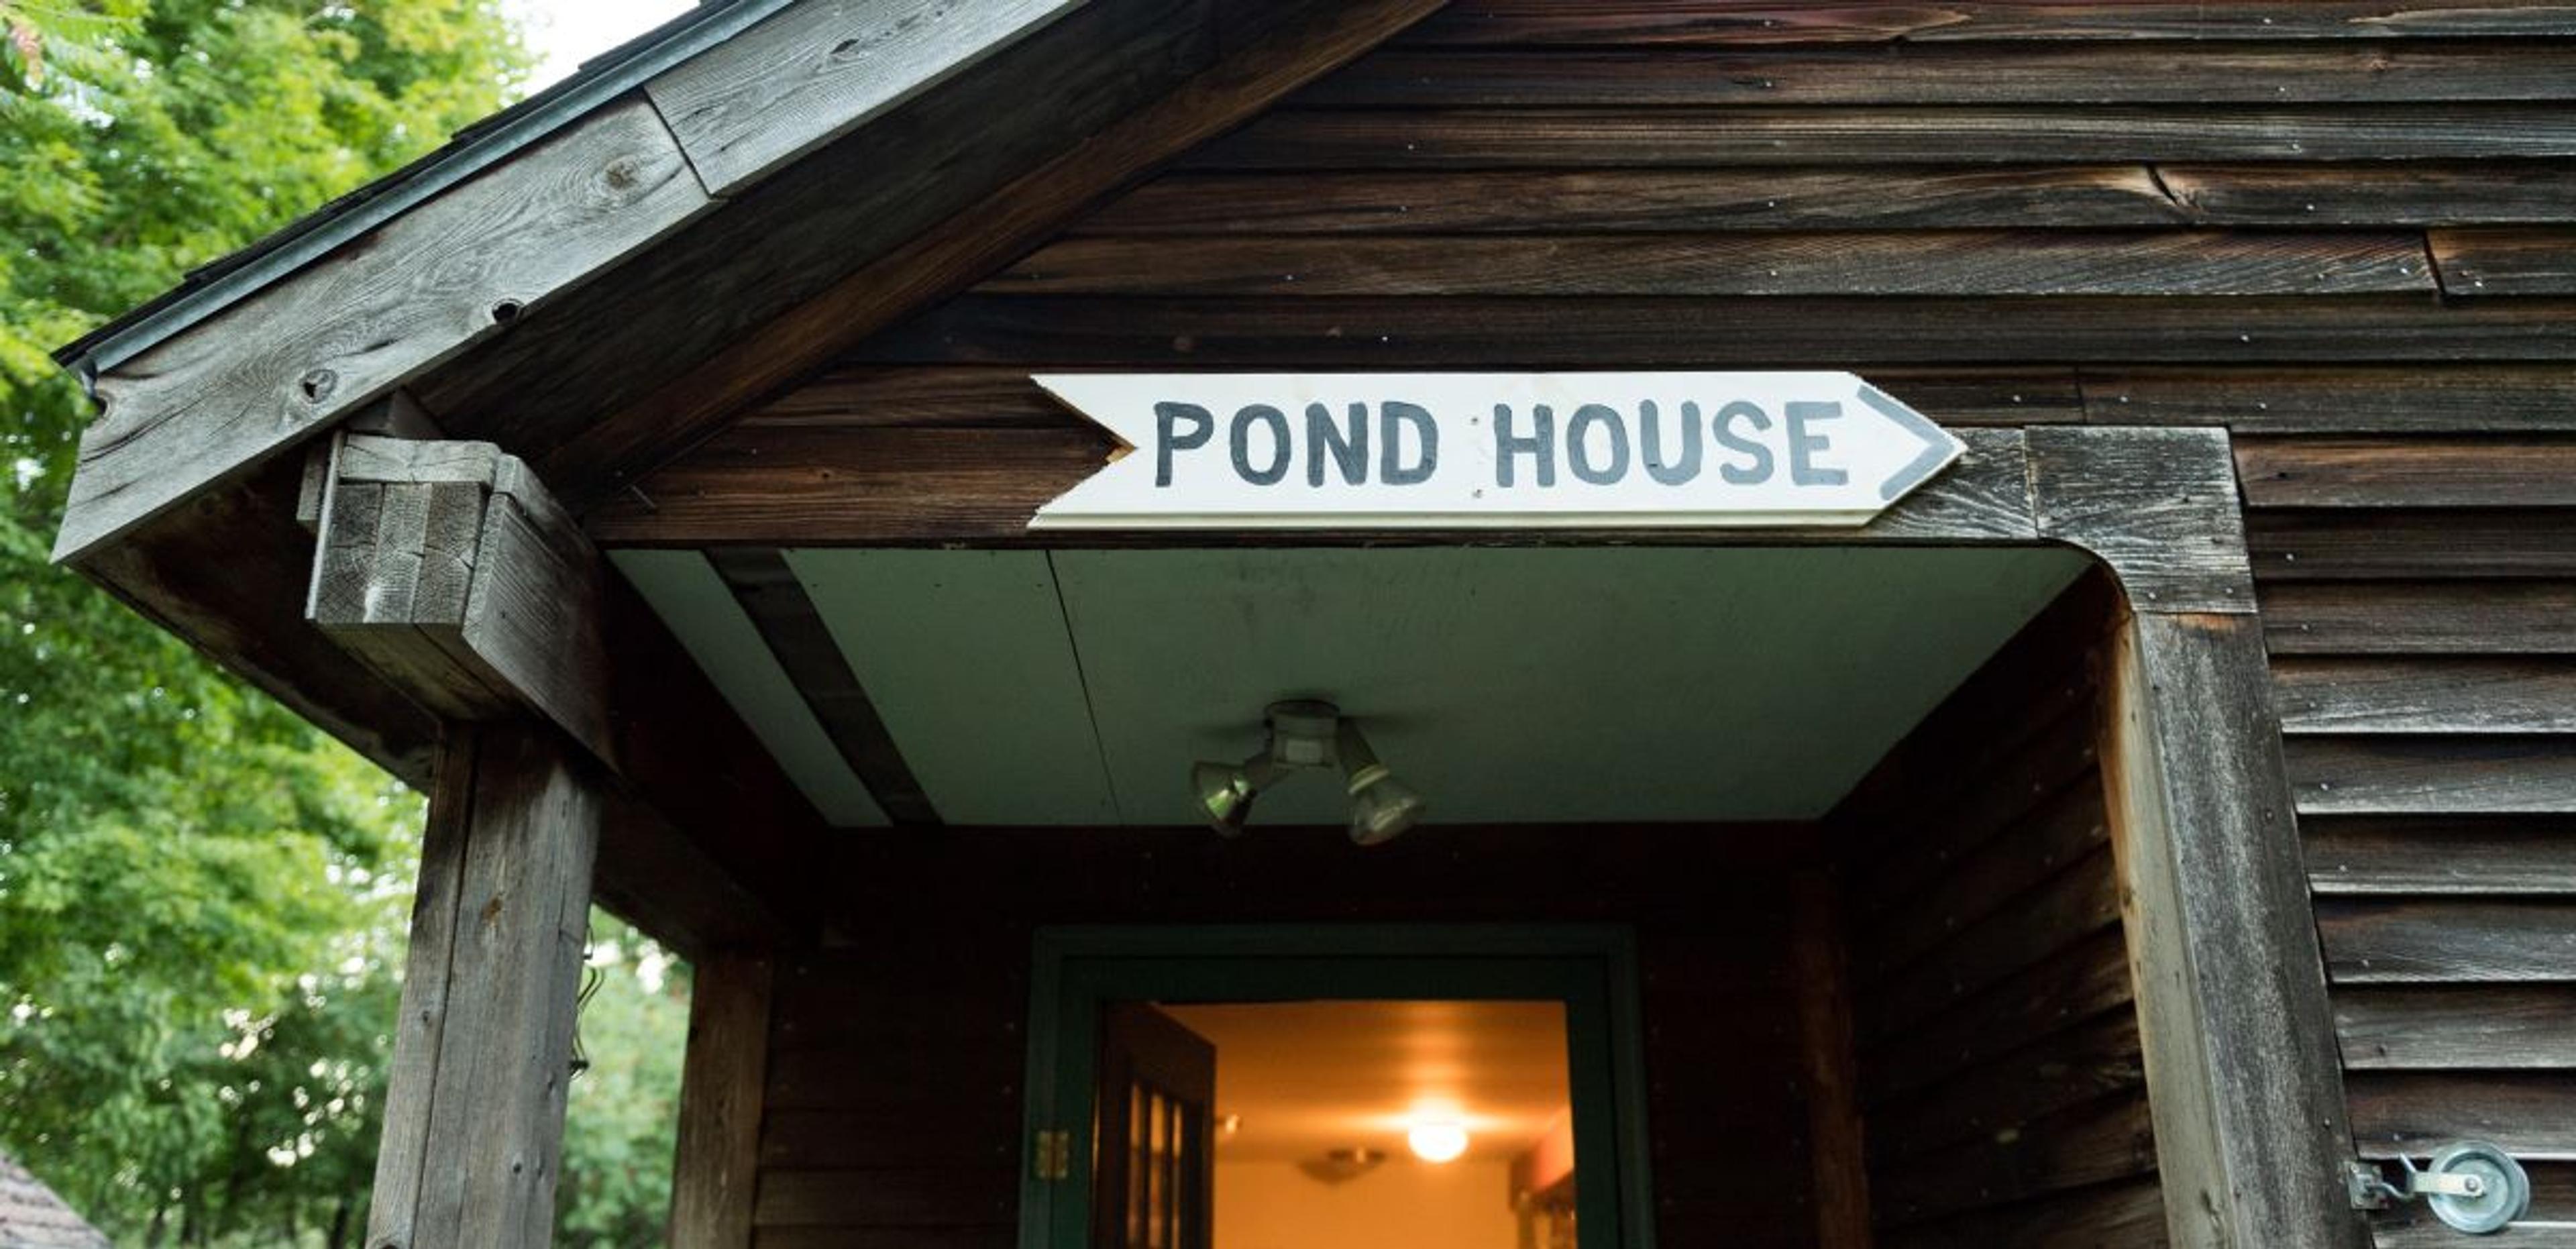 A sign reading “Pond House” on a cabin at the Webb organic dairy farm in Vermont.